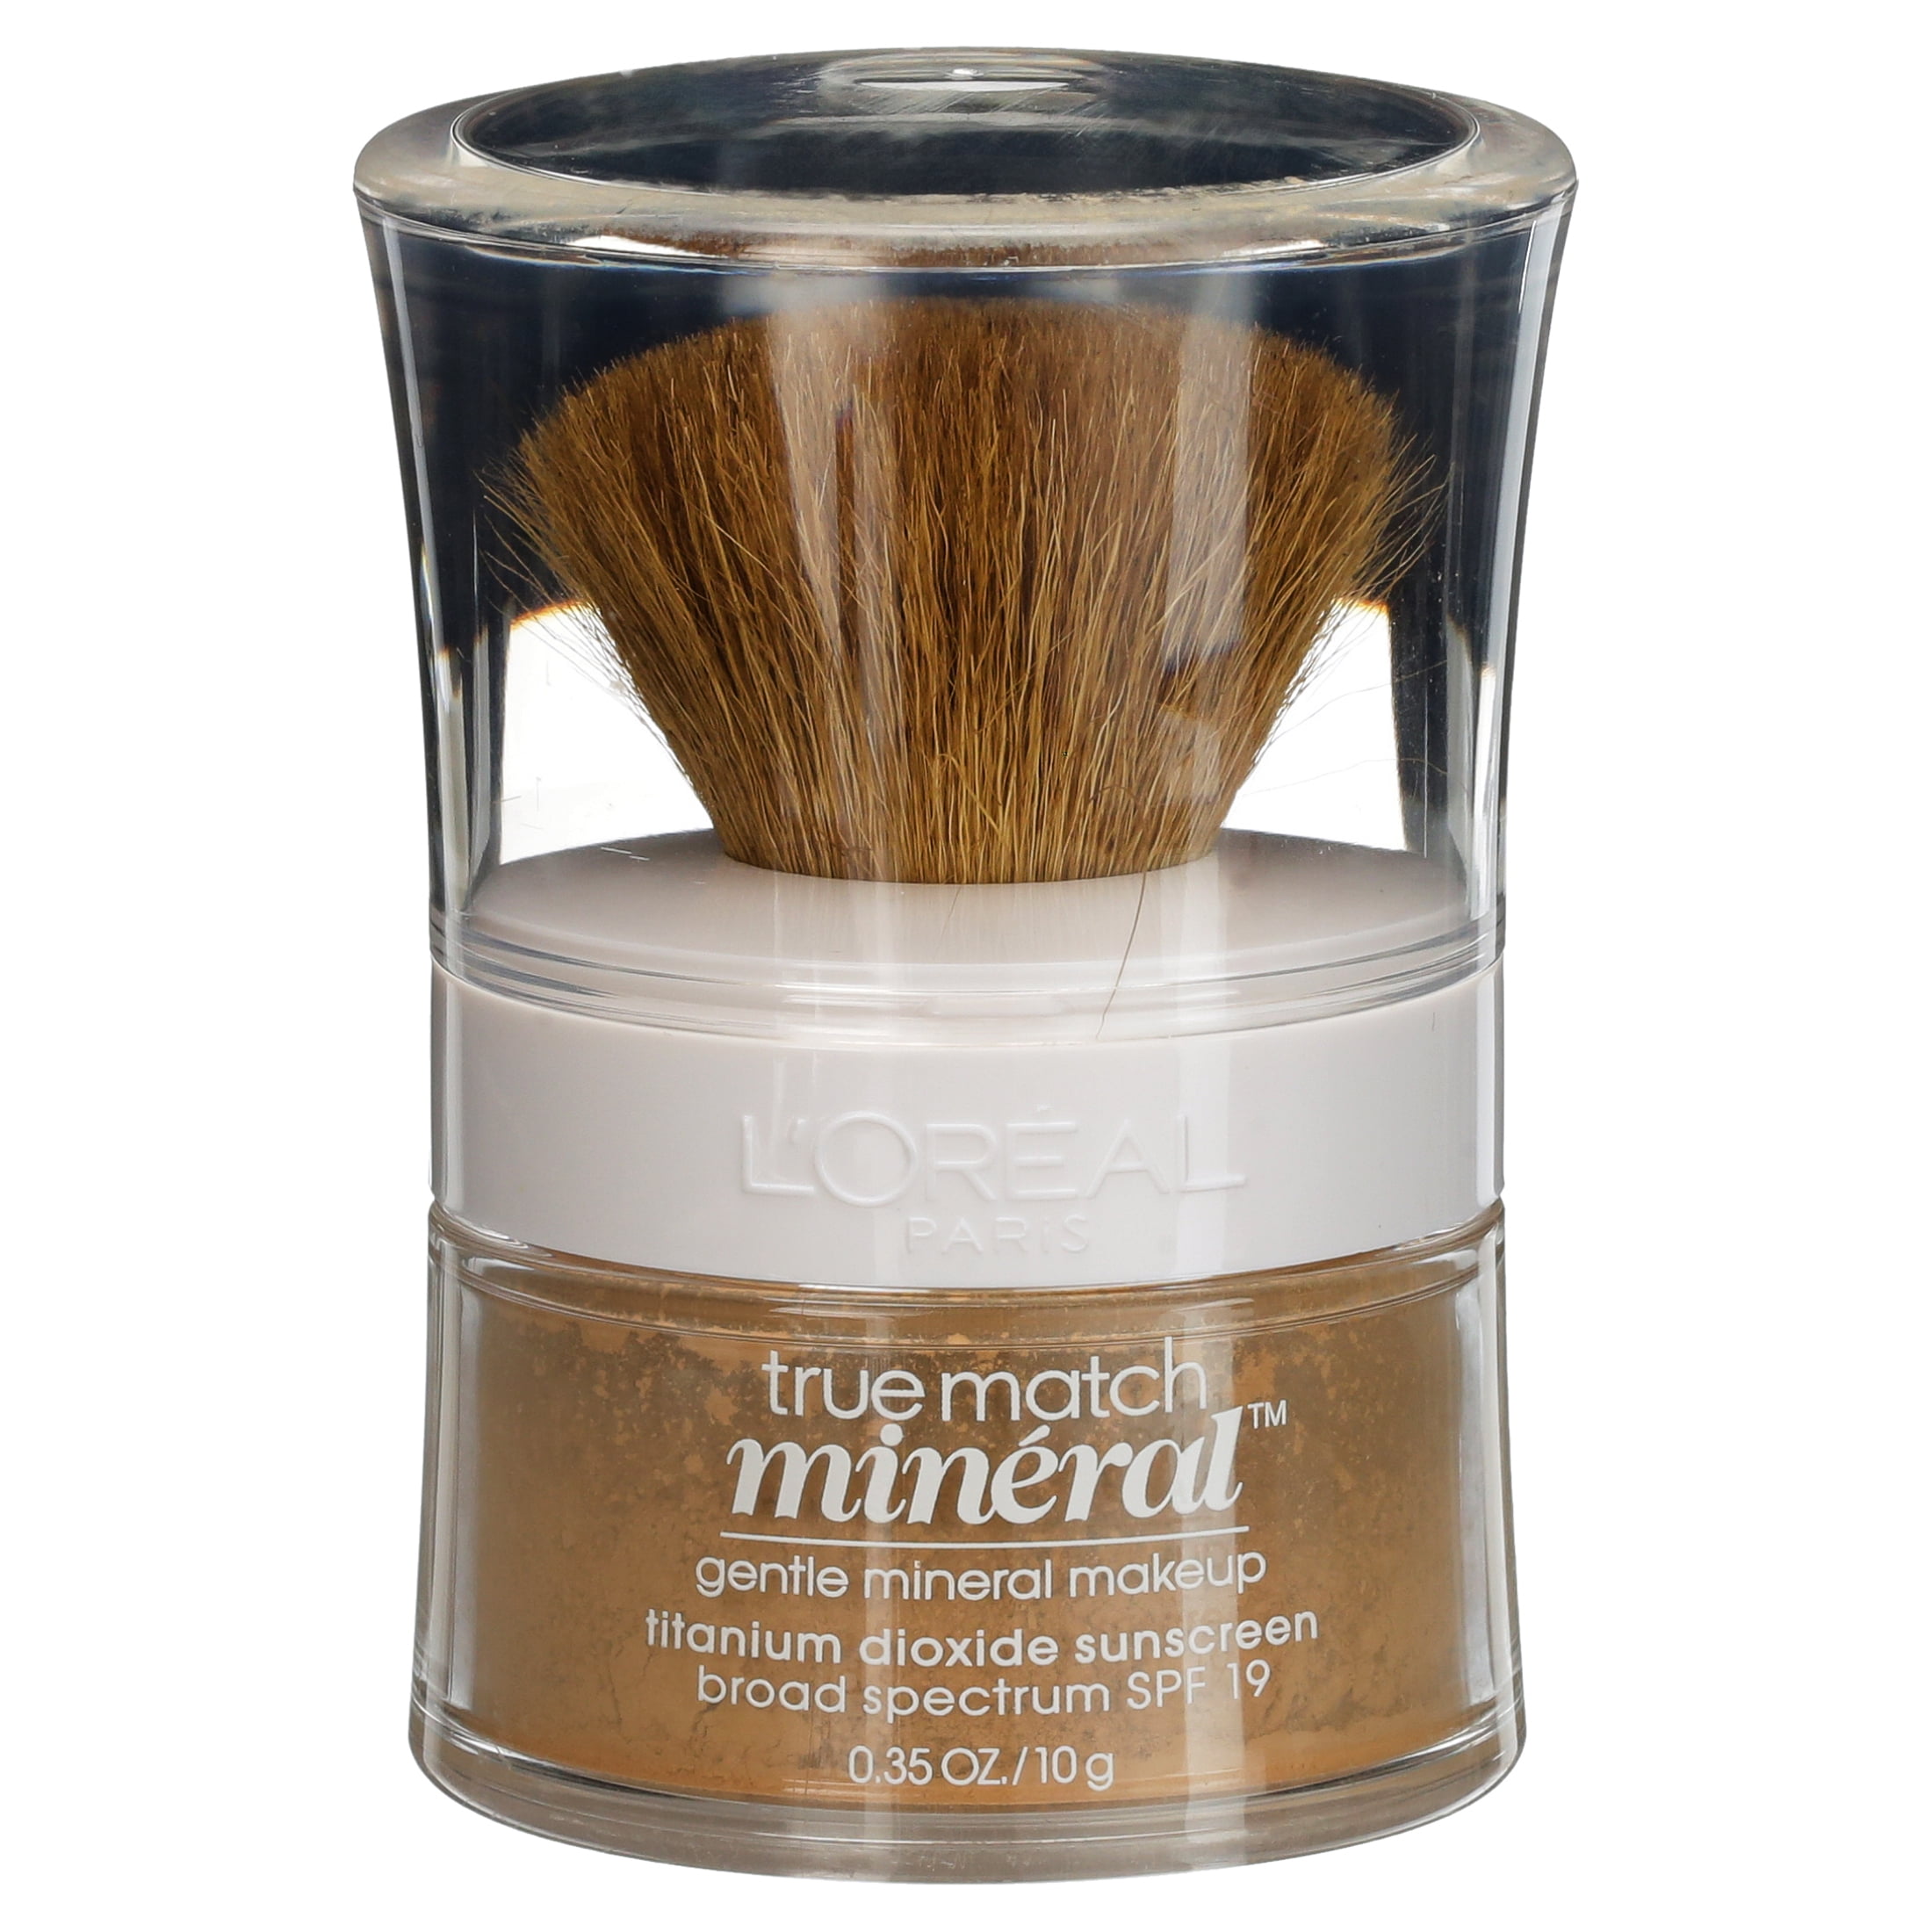 L'Oreal True Match Minerals Foundation Powder - Make Up from High